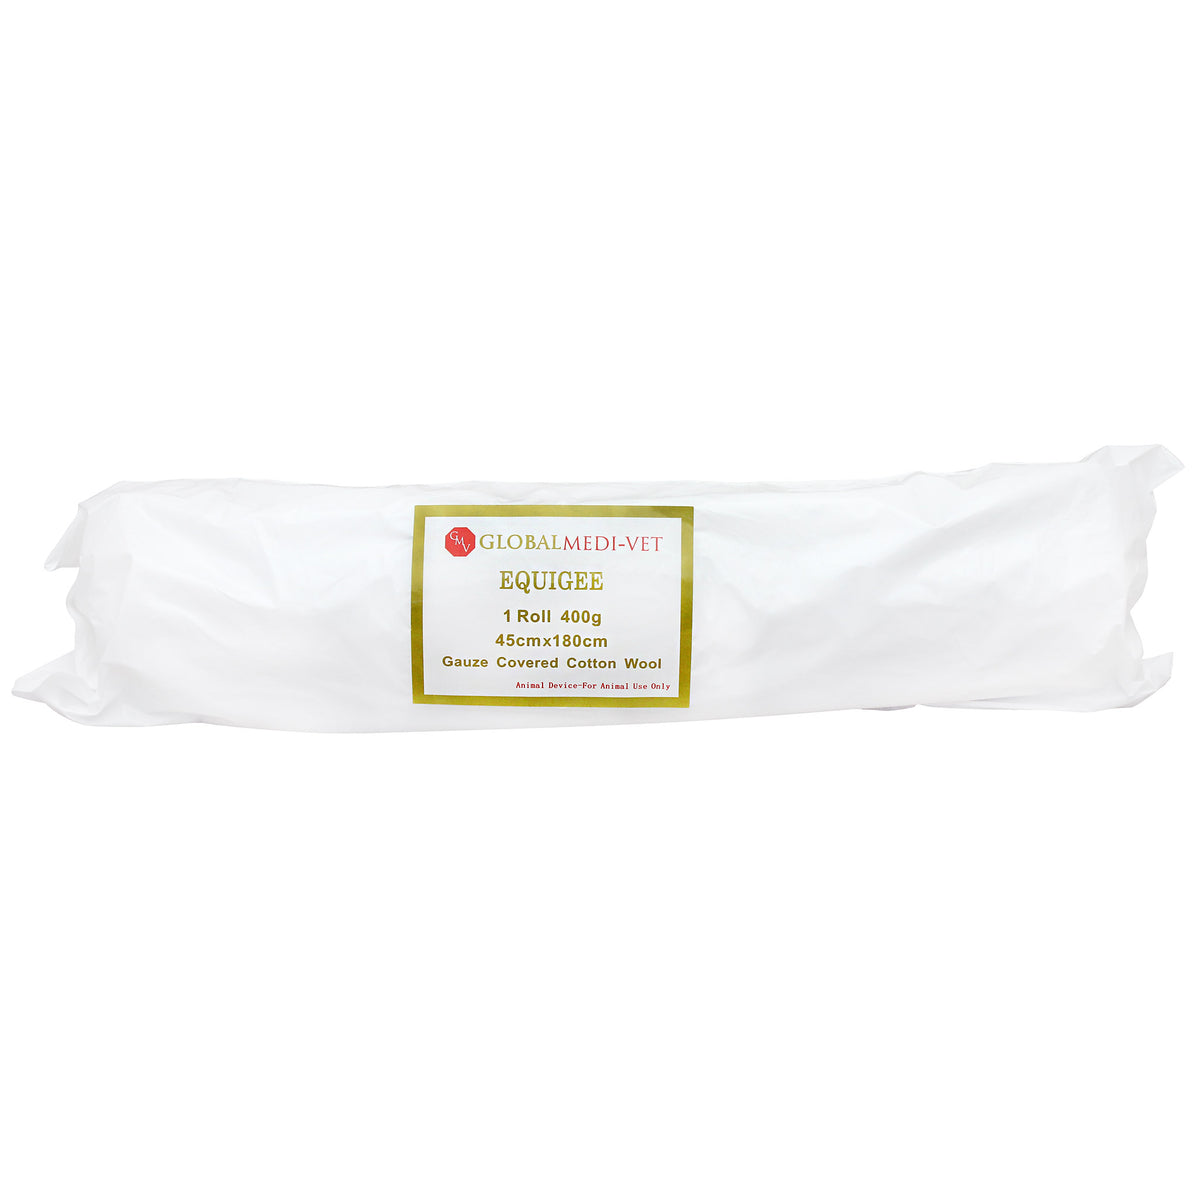 GMV Equigee Gauze Covered Cotton Wool Roll